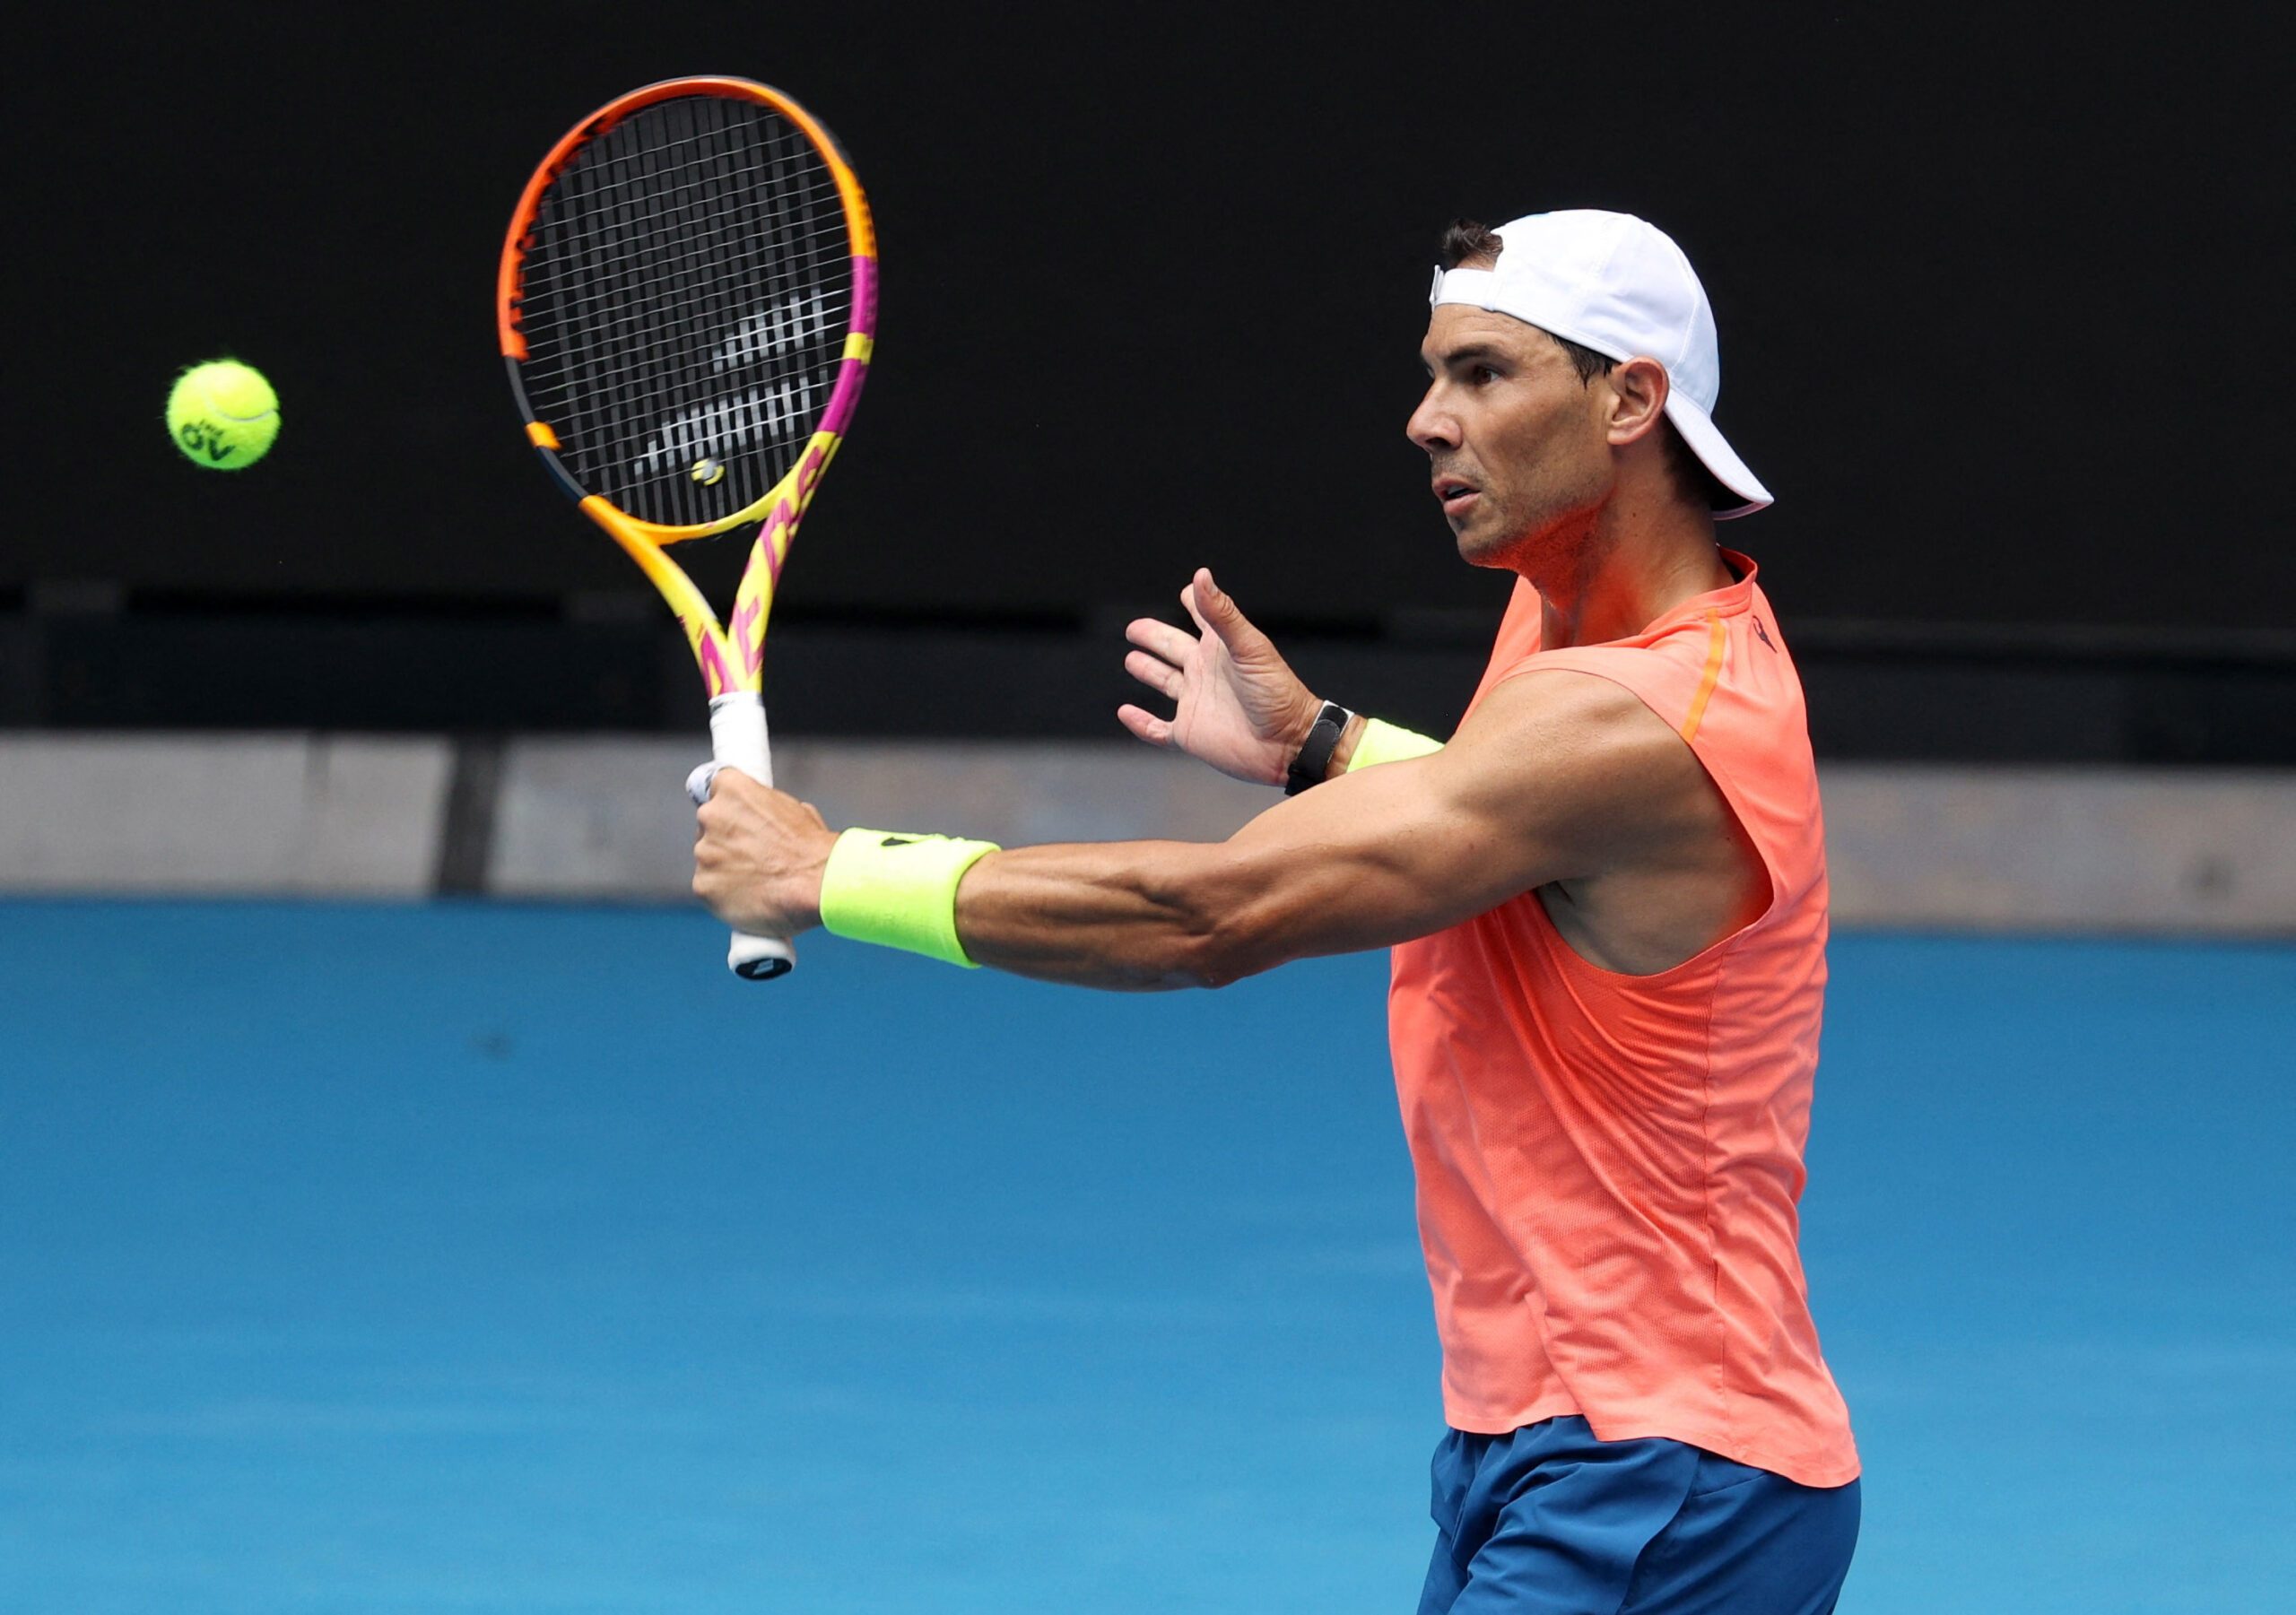 Nadal launches title defense as Australian Open ushers in new era